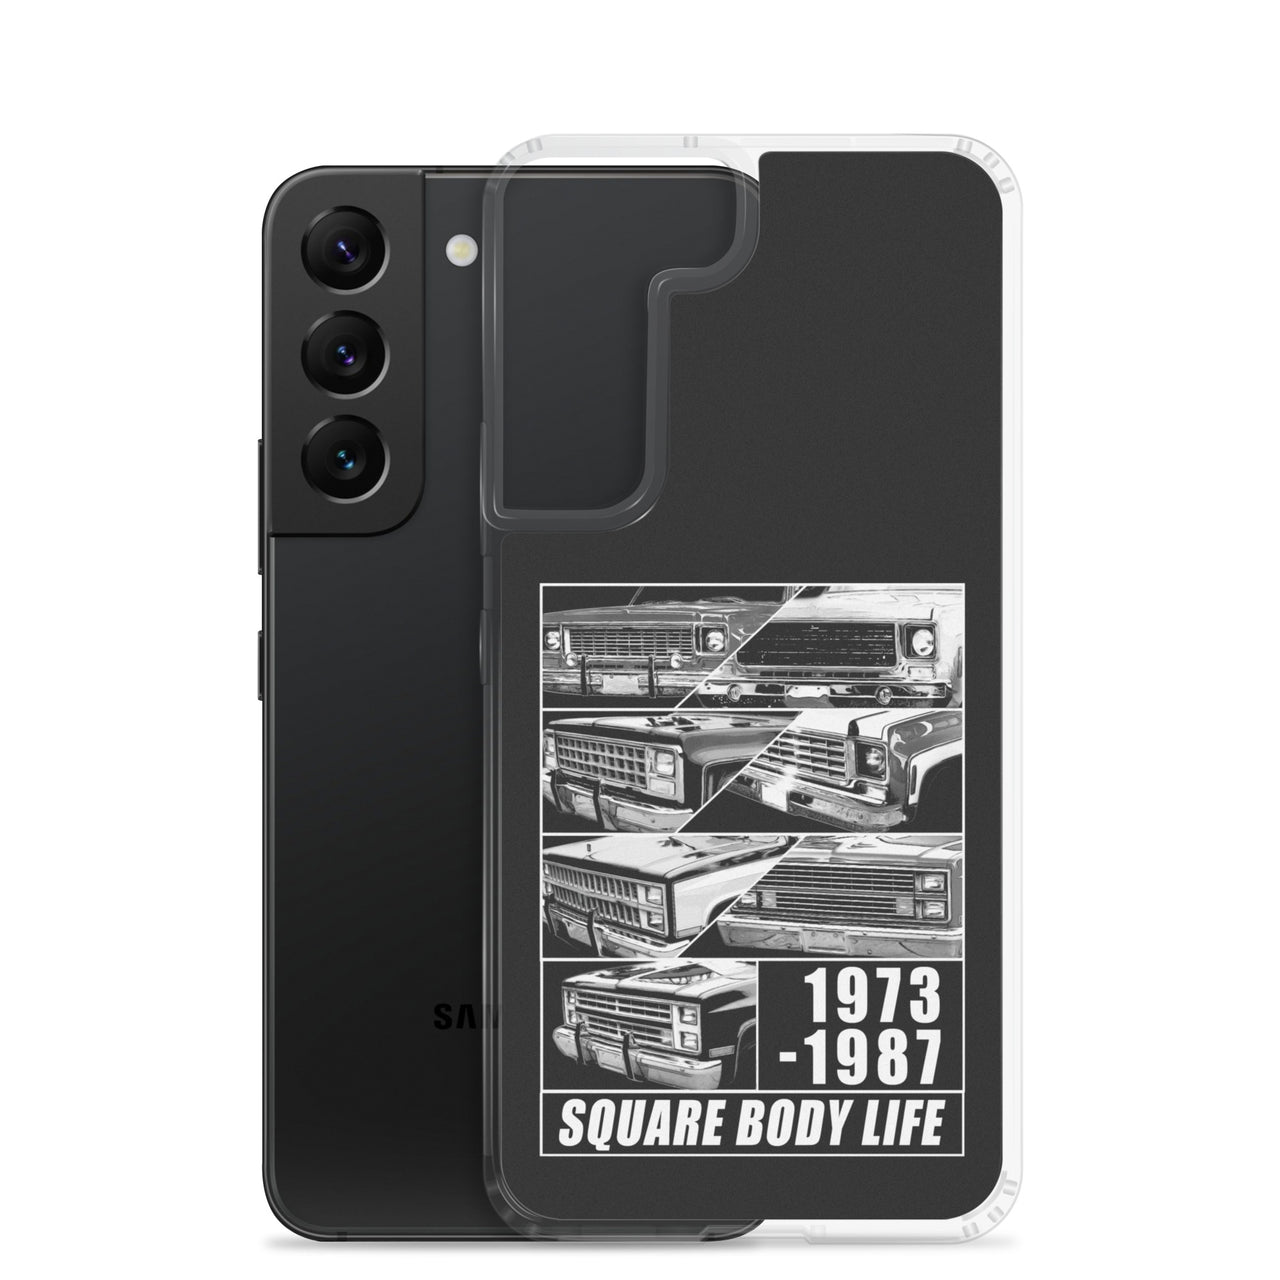 Squarebody Truck Samsung Phone Case For S22